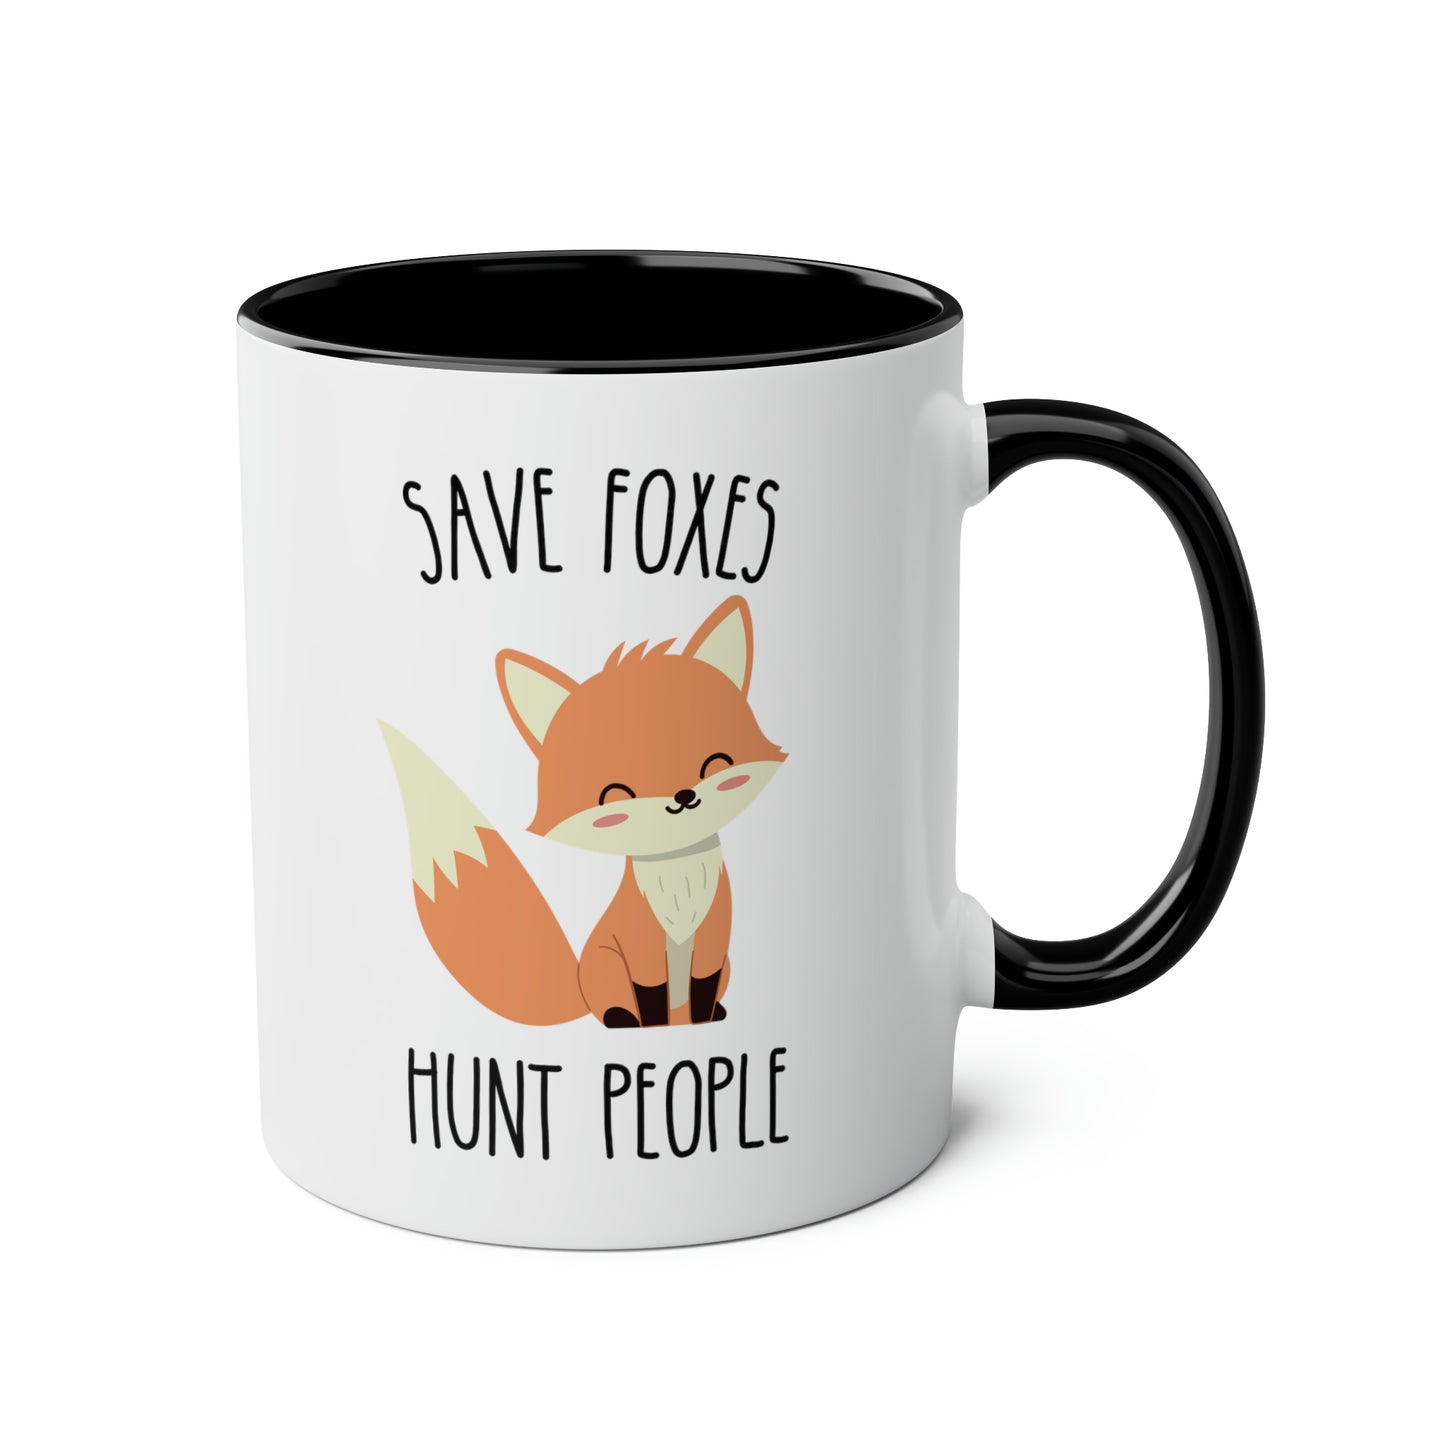 Save Foxes Hunt People 11oz white with black accent funny large coffee mug gift for vegetarian vegan animal rights cute hipster quirky rude present waveywares wavey wares wavywares wavy wares